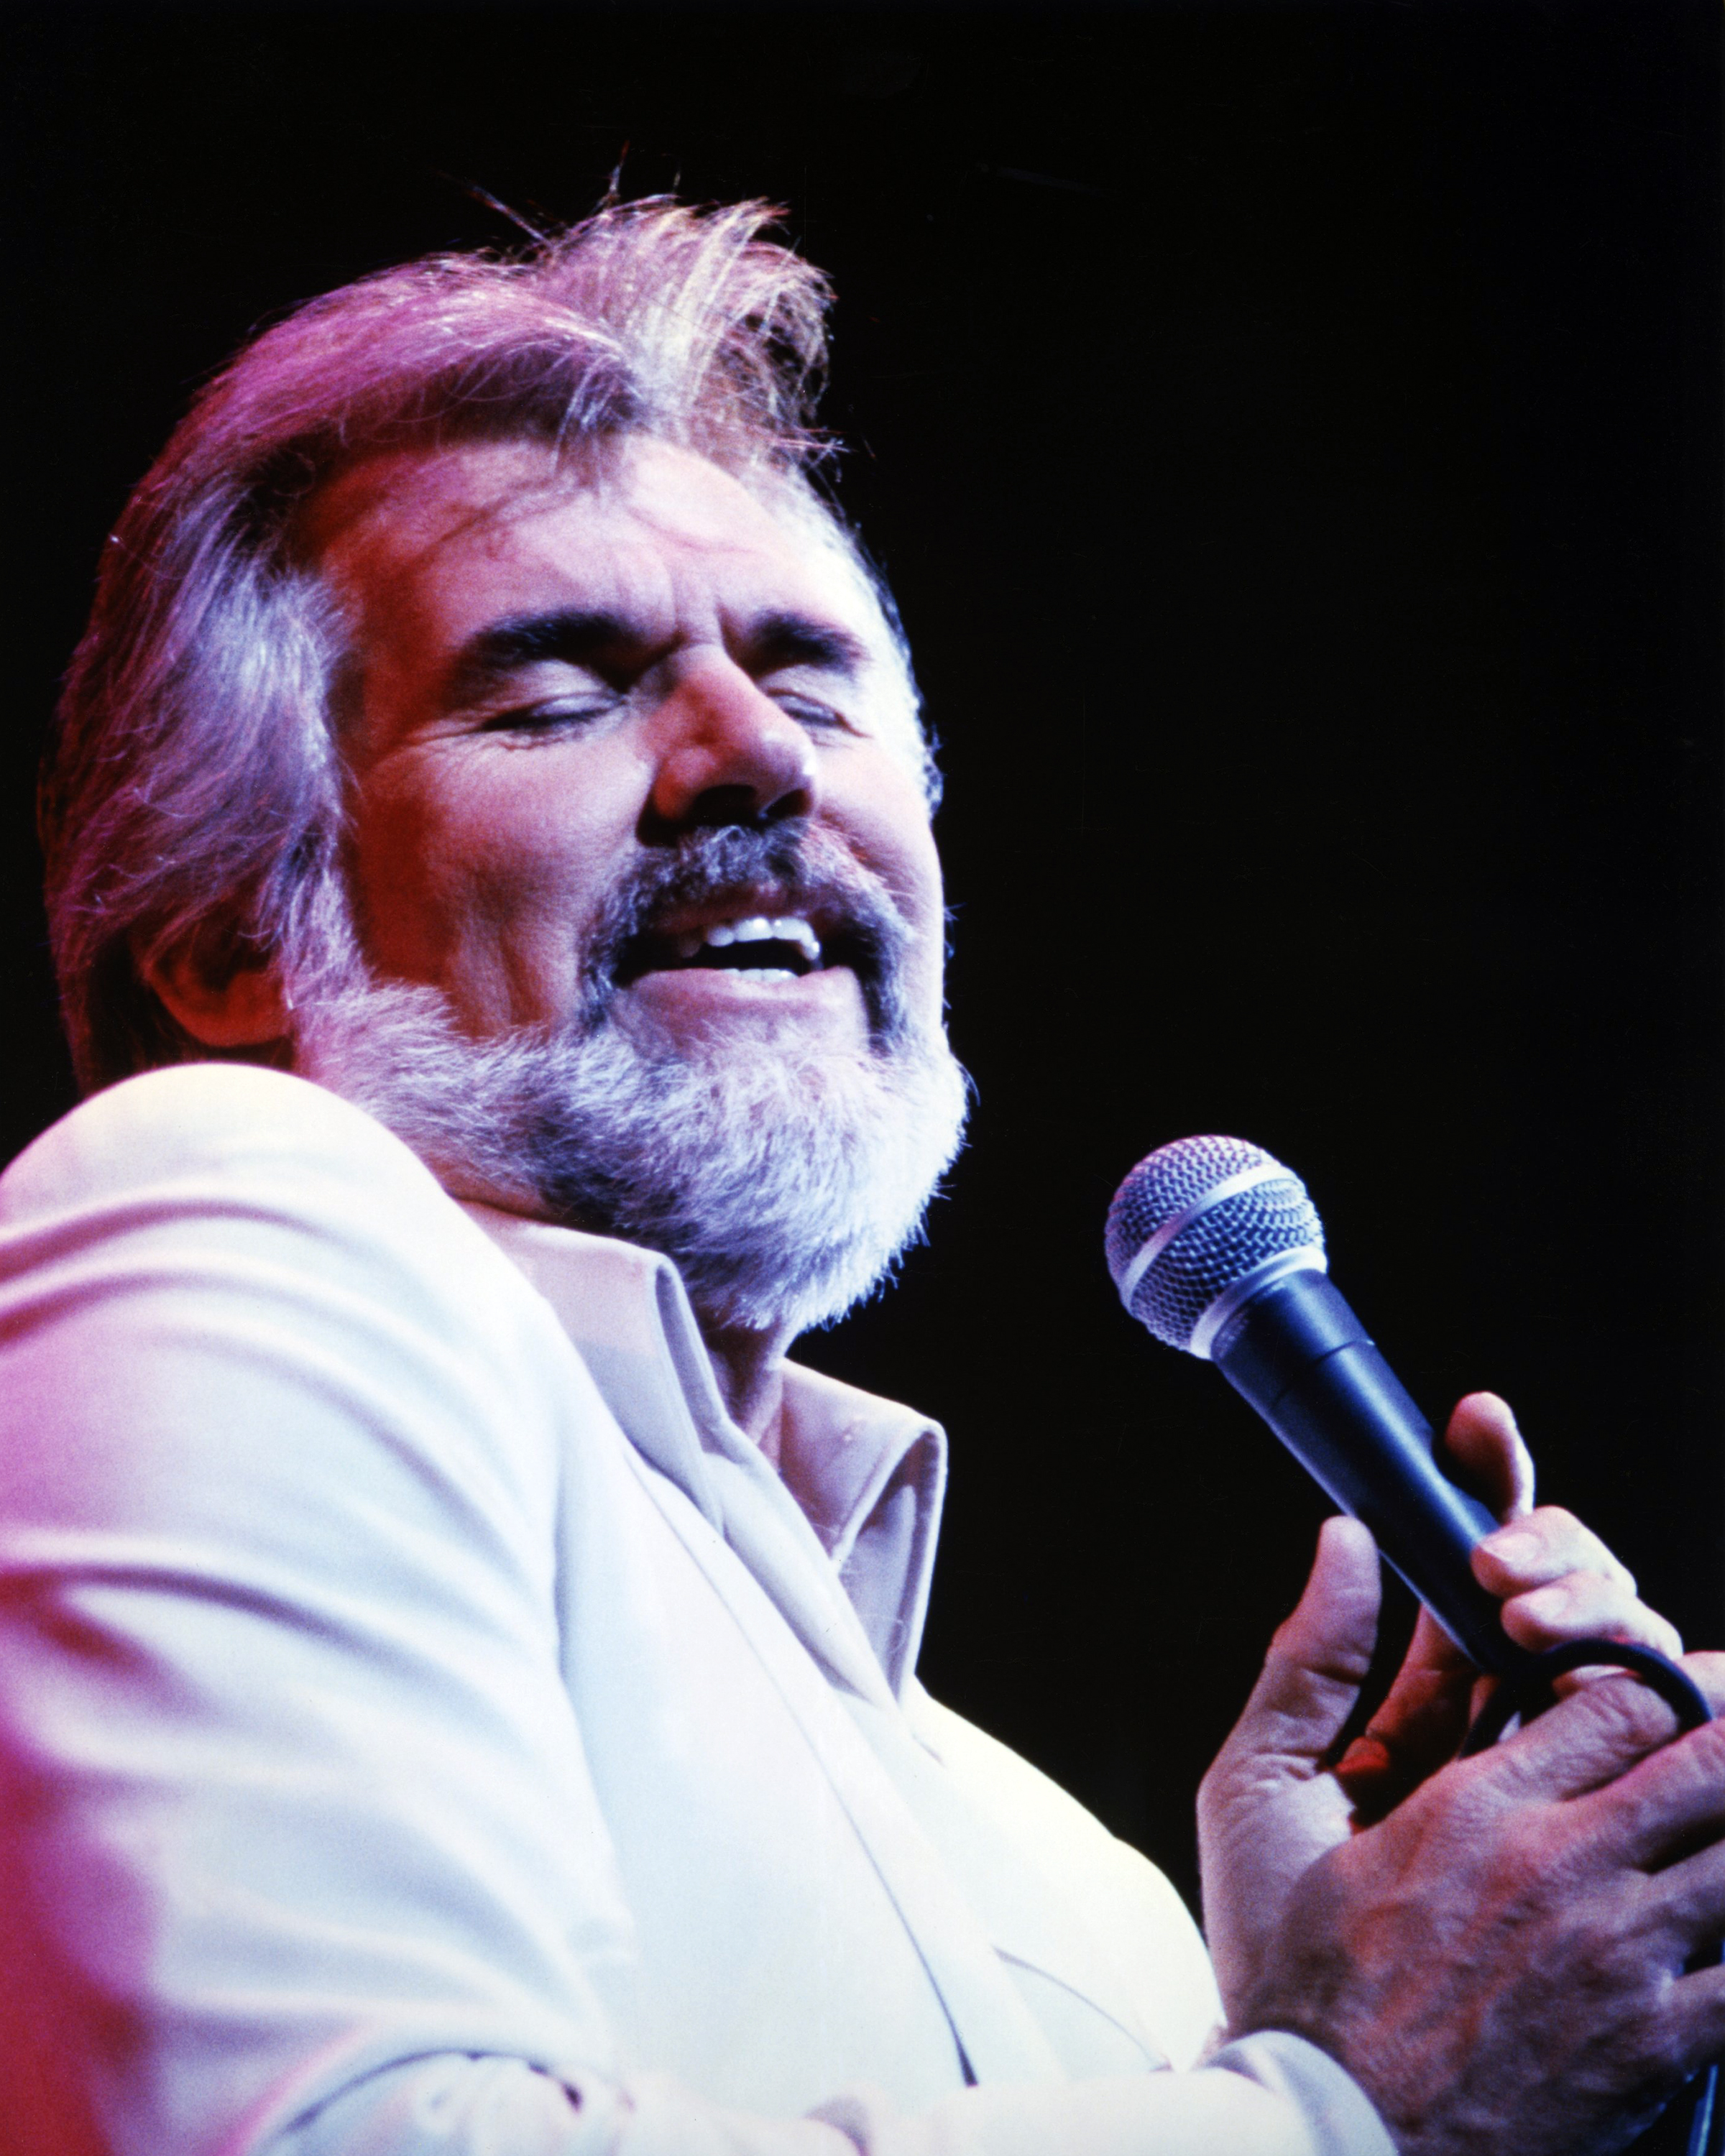 Kenny Rogers performing at an event in 1980 | Source: Getty Images